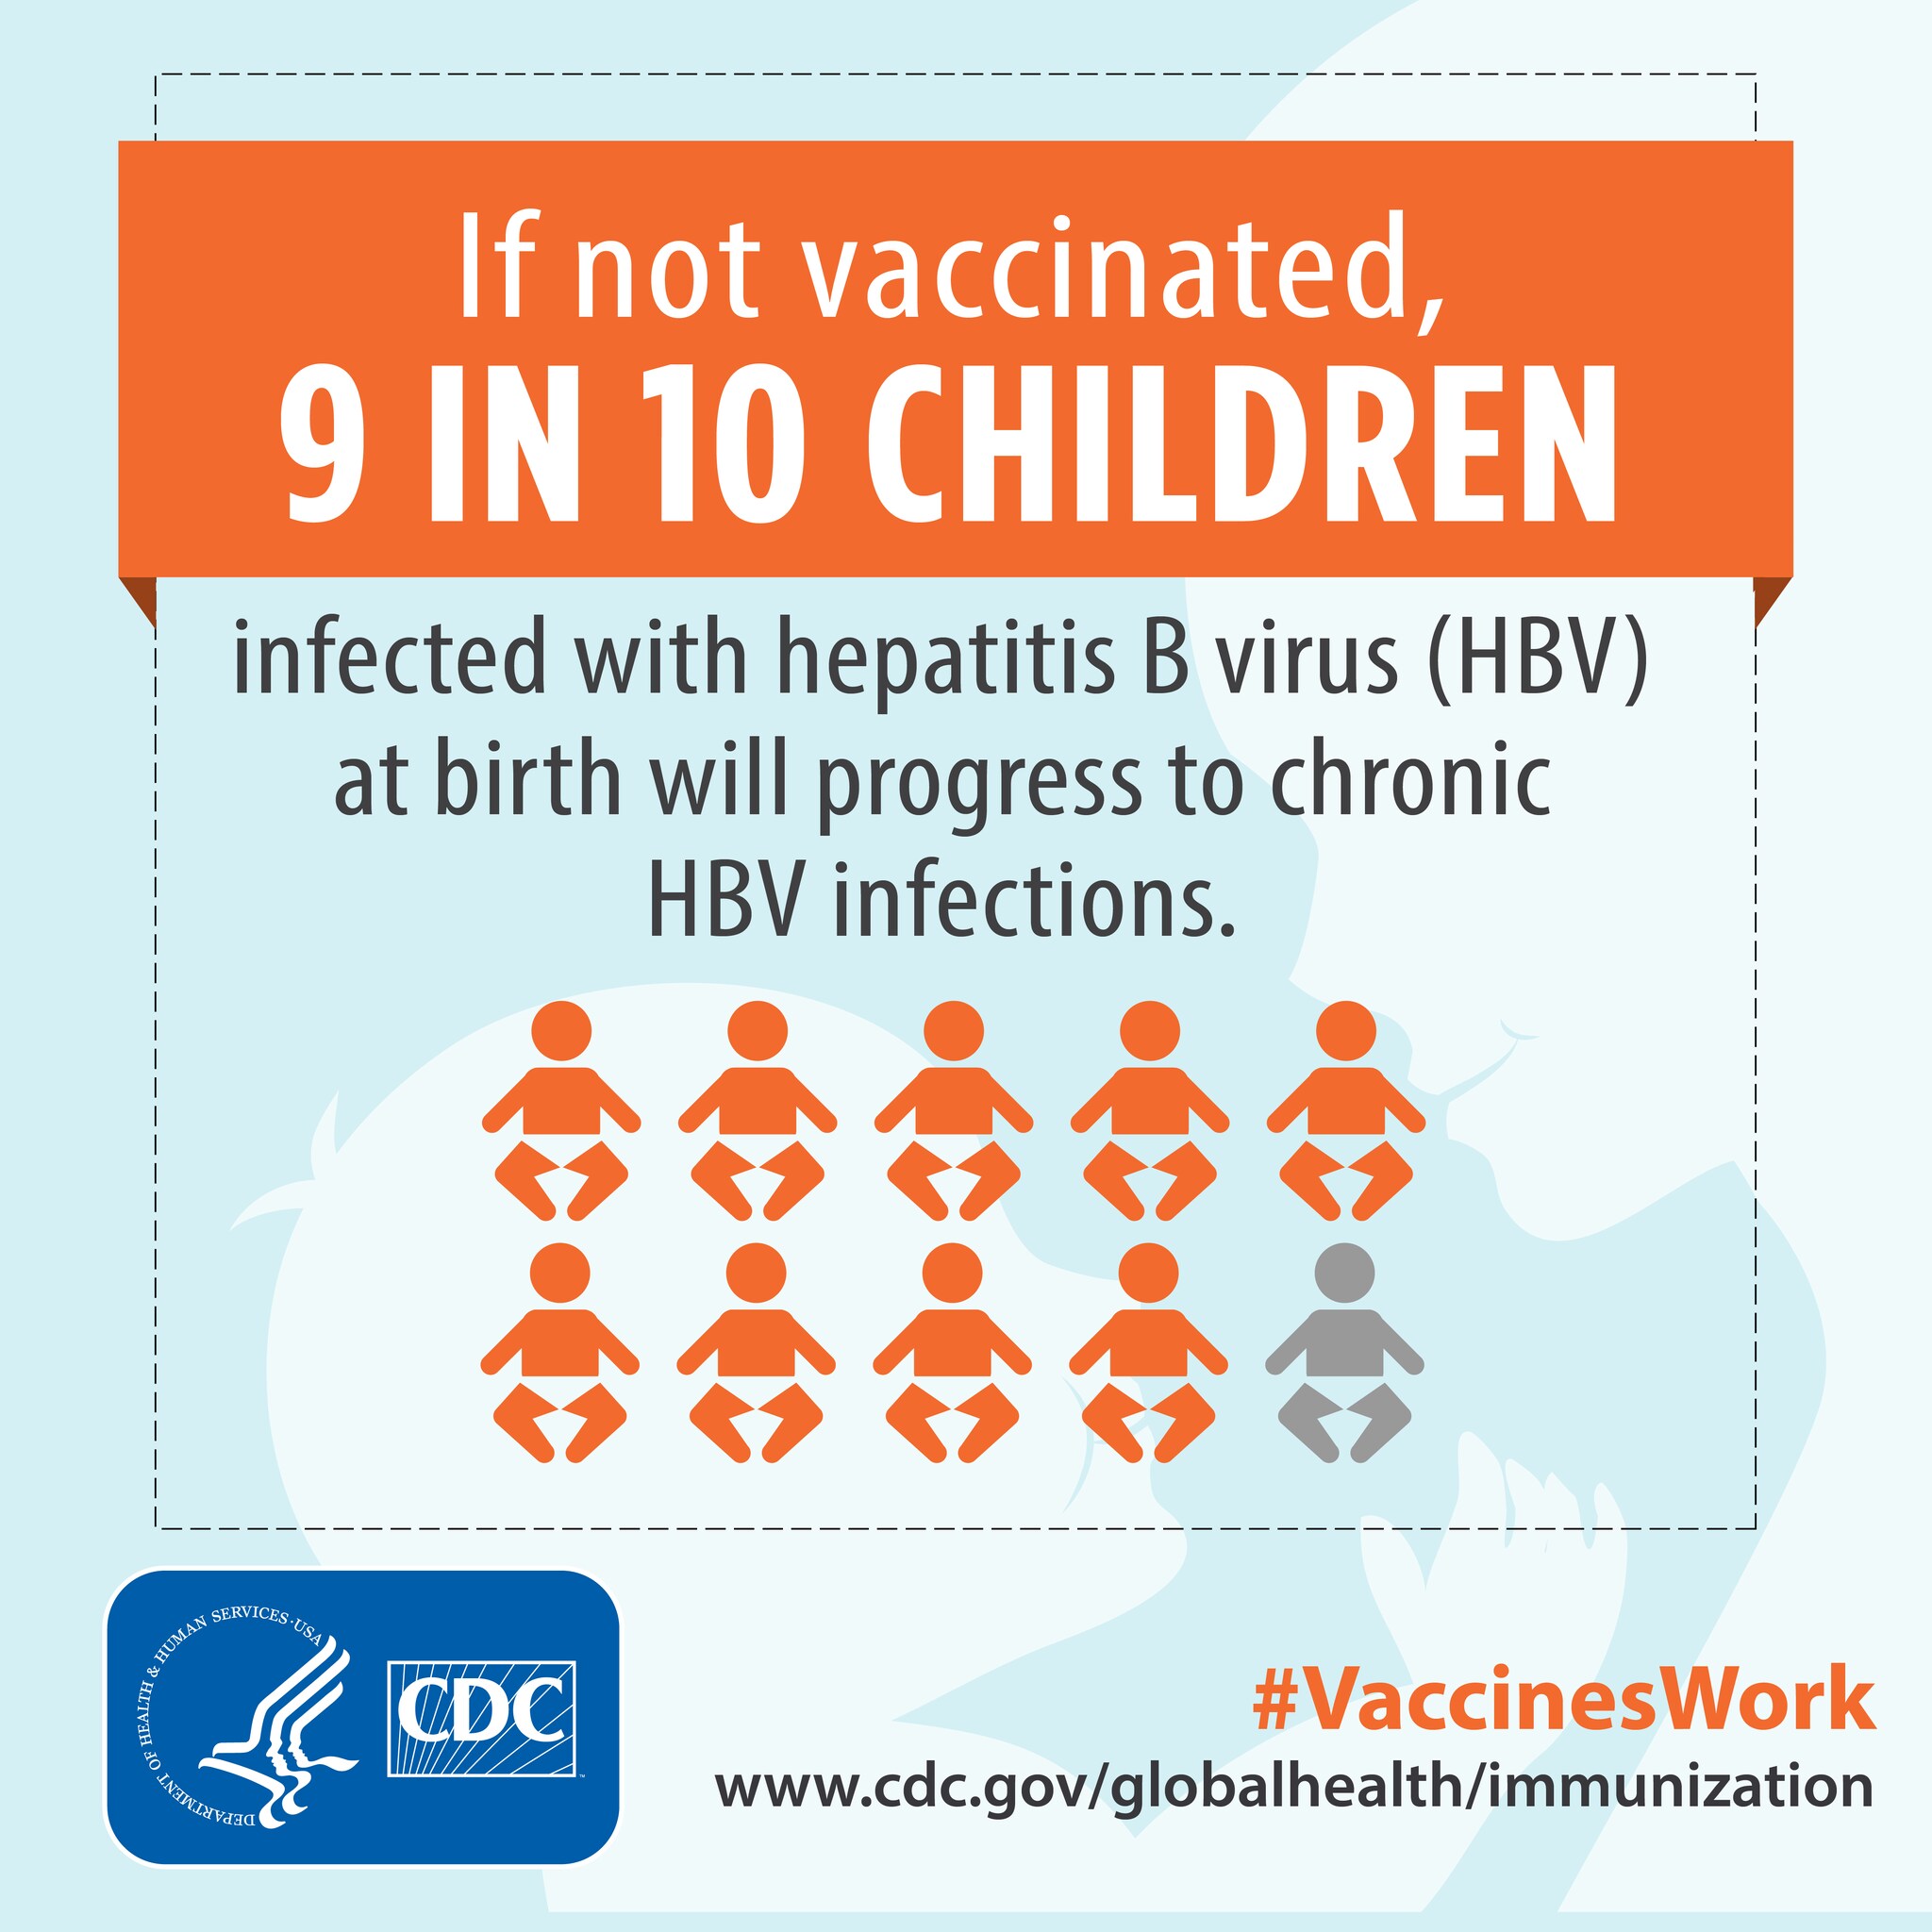 If not vaccinated, 9 in 10 children infected with hepatitis B virus (HBV) at birth will progress to chronic HBV infections #VaccinesWork